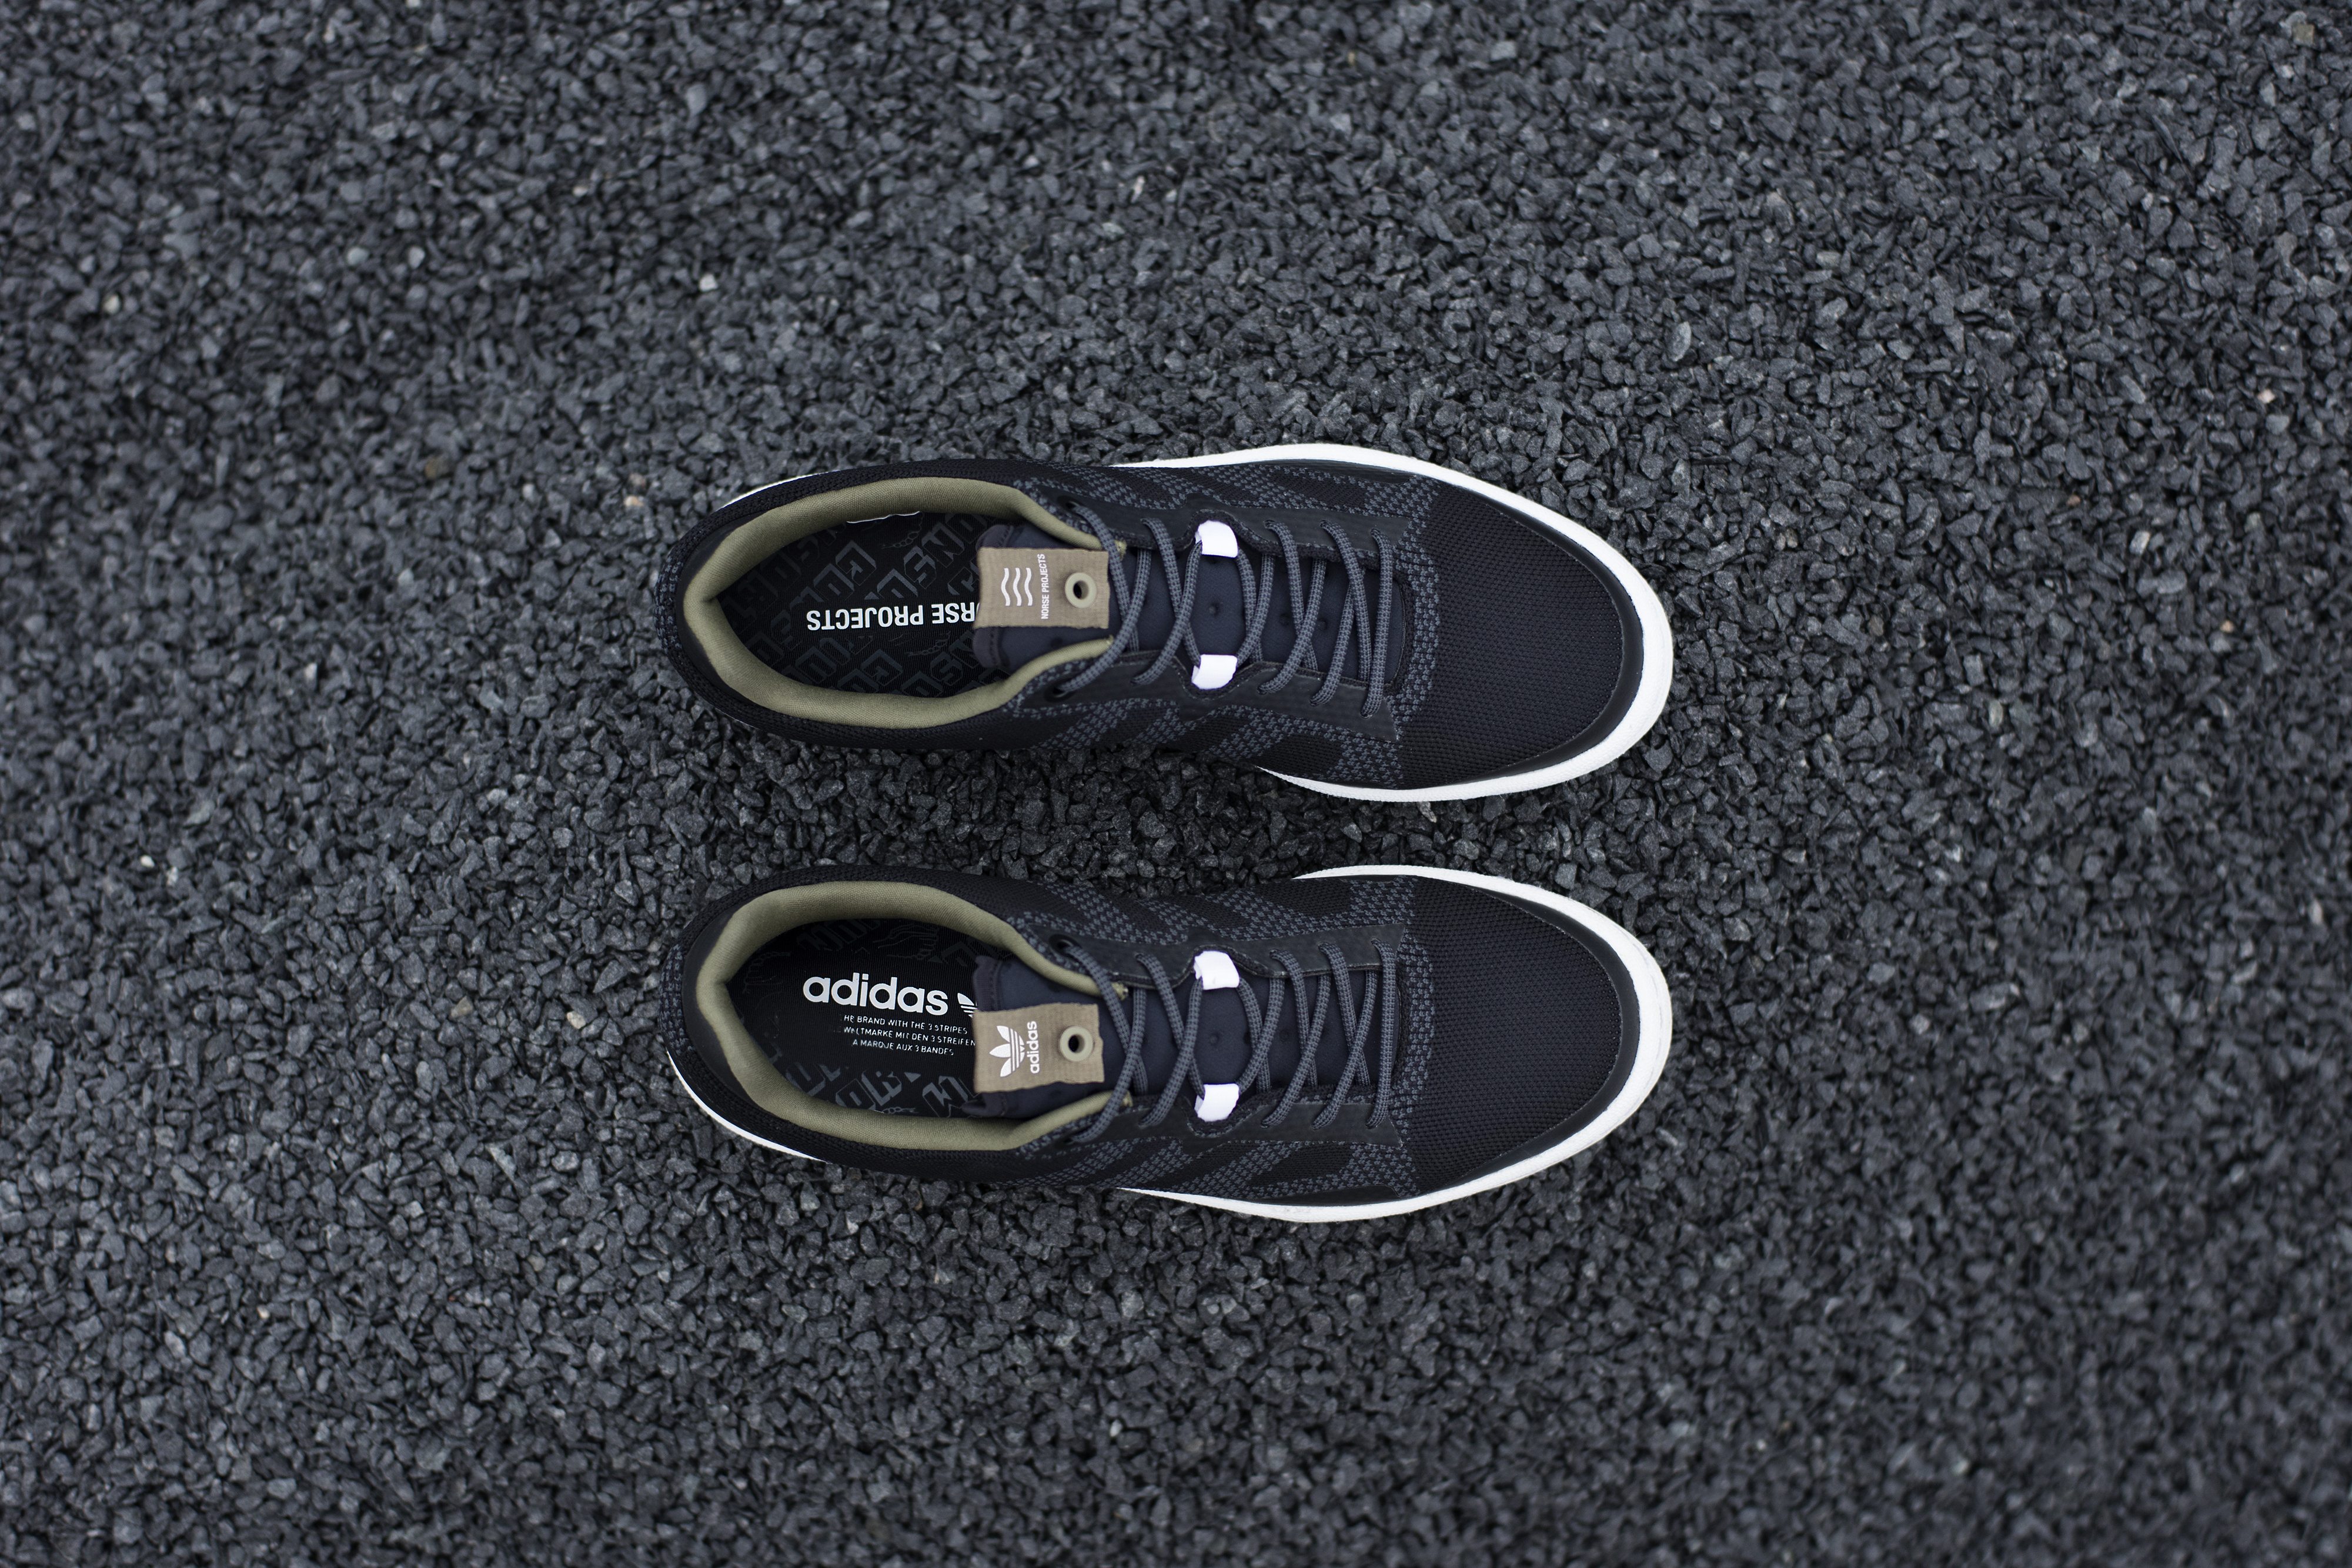 Norse Projects x adidas Consortium "Layers" Pack